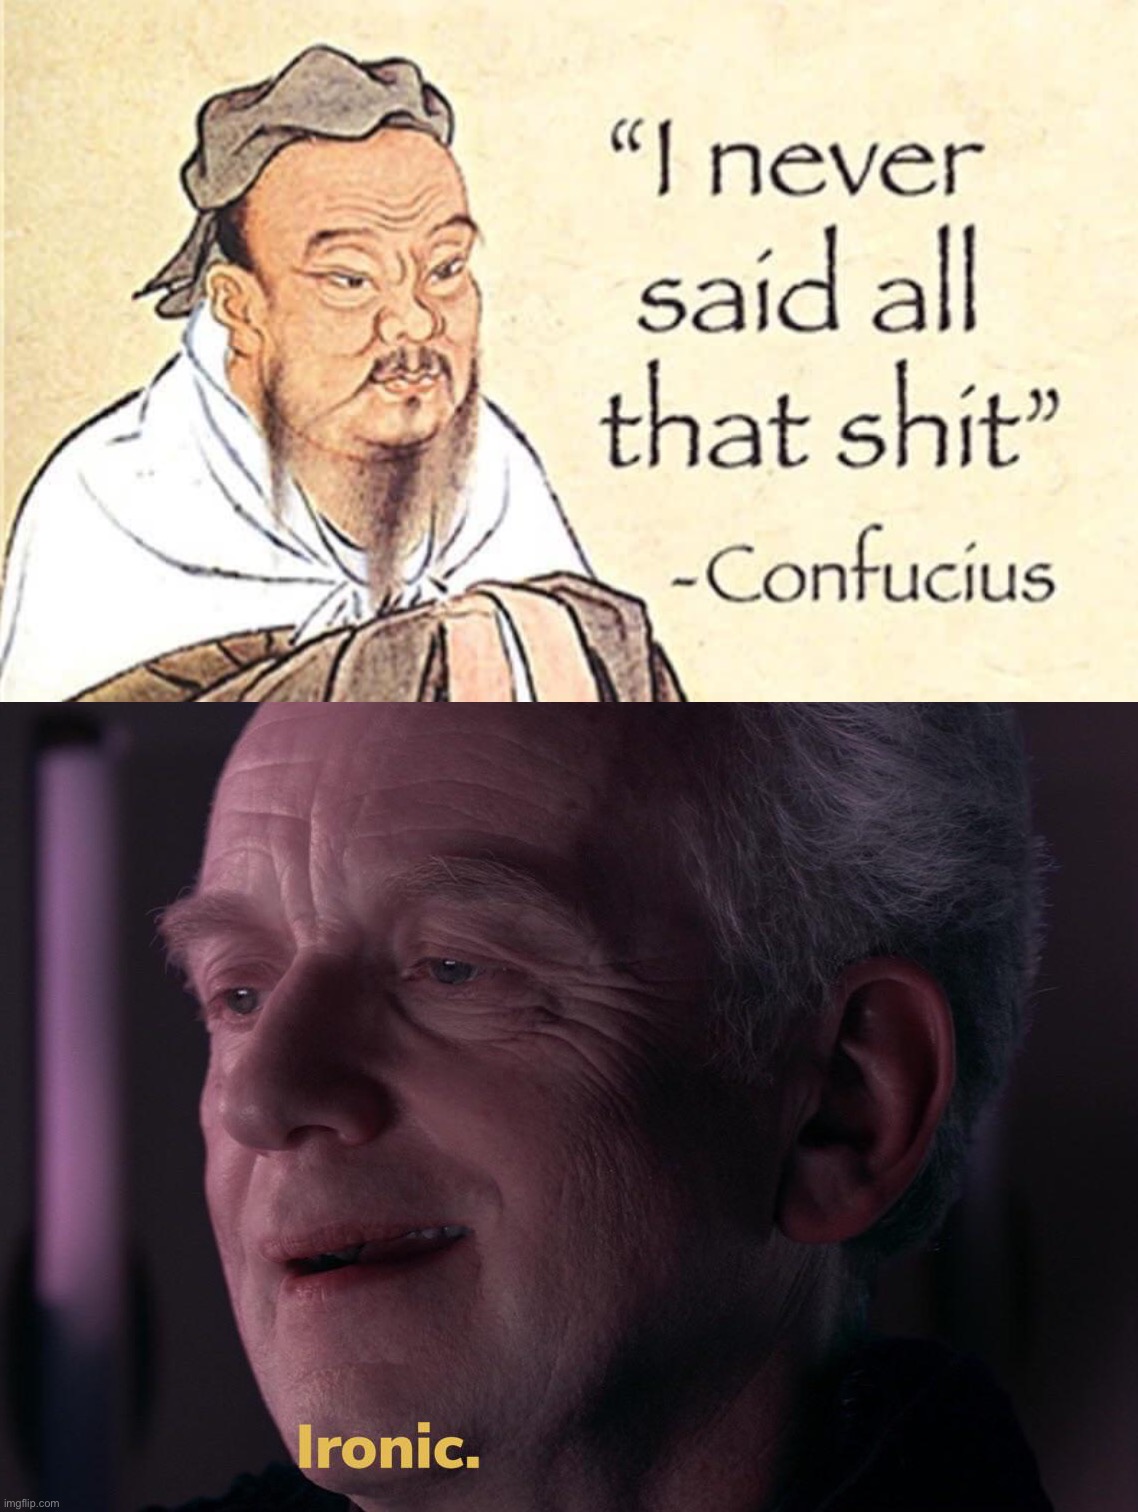 What are the chances this is a made-up Confucius quote | image tagged in confucius quote made-up,ironic,confucius,confucius says,confucious say,confucius say | made w/ Imgflip meme maker